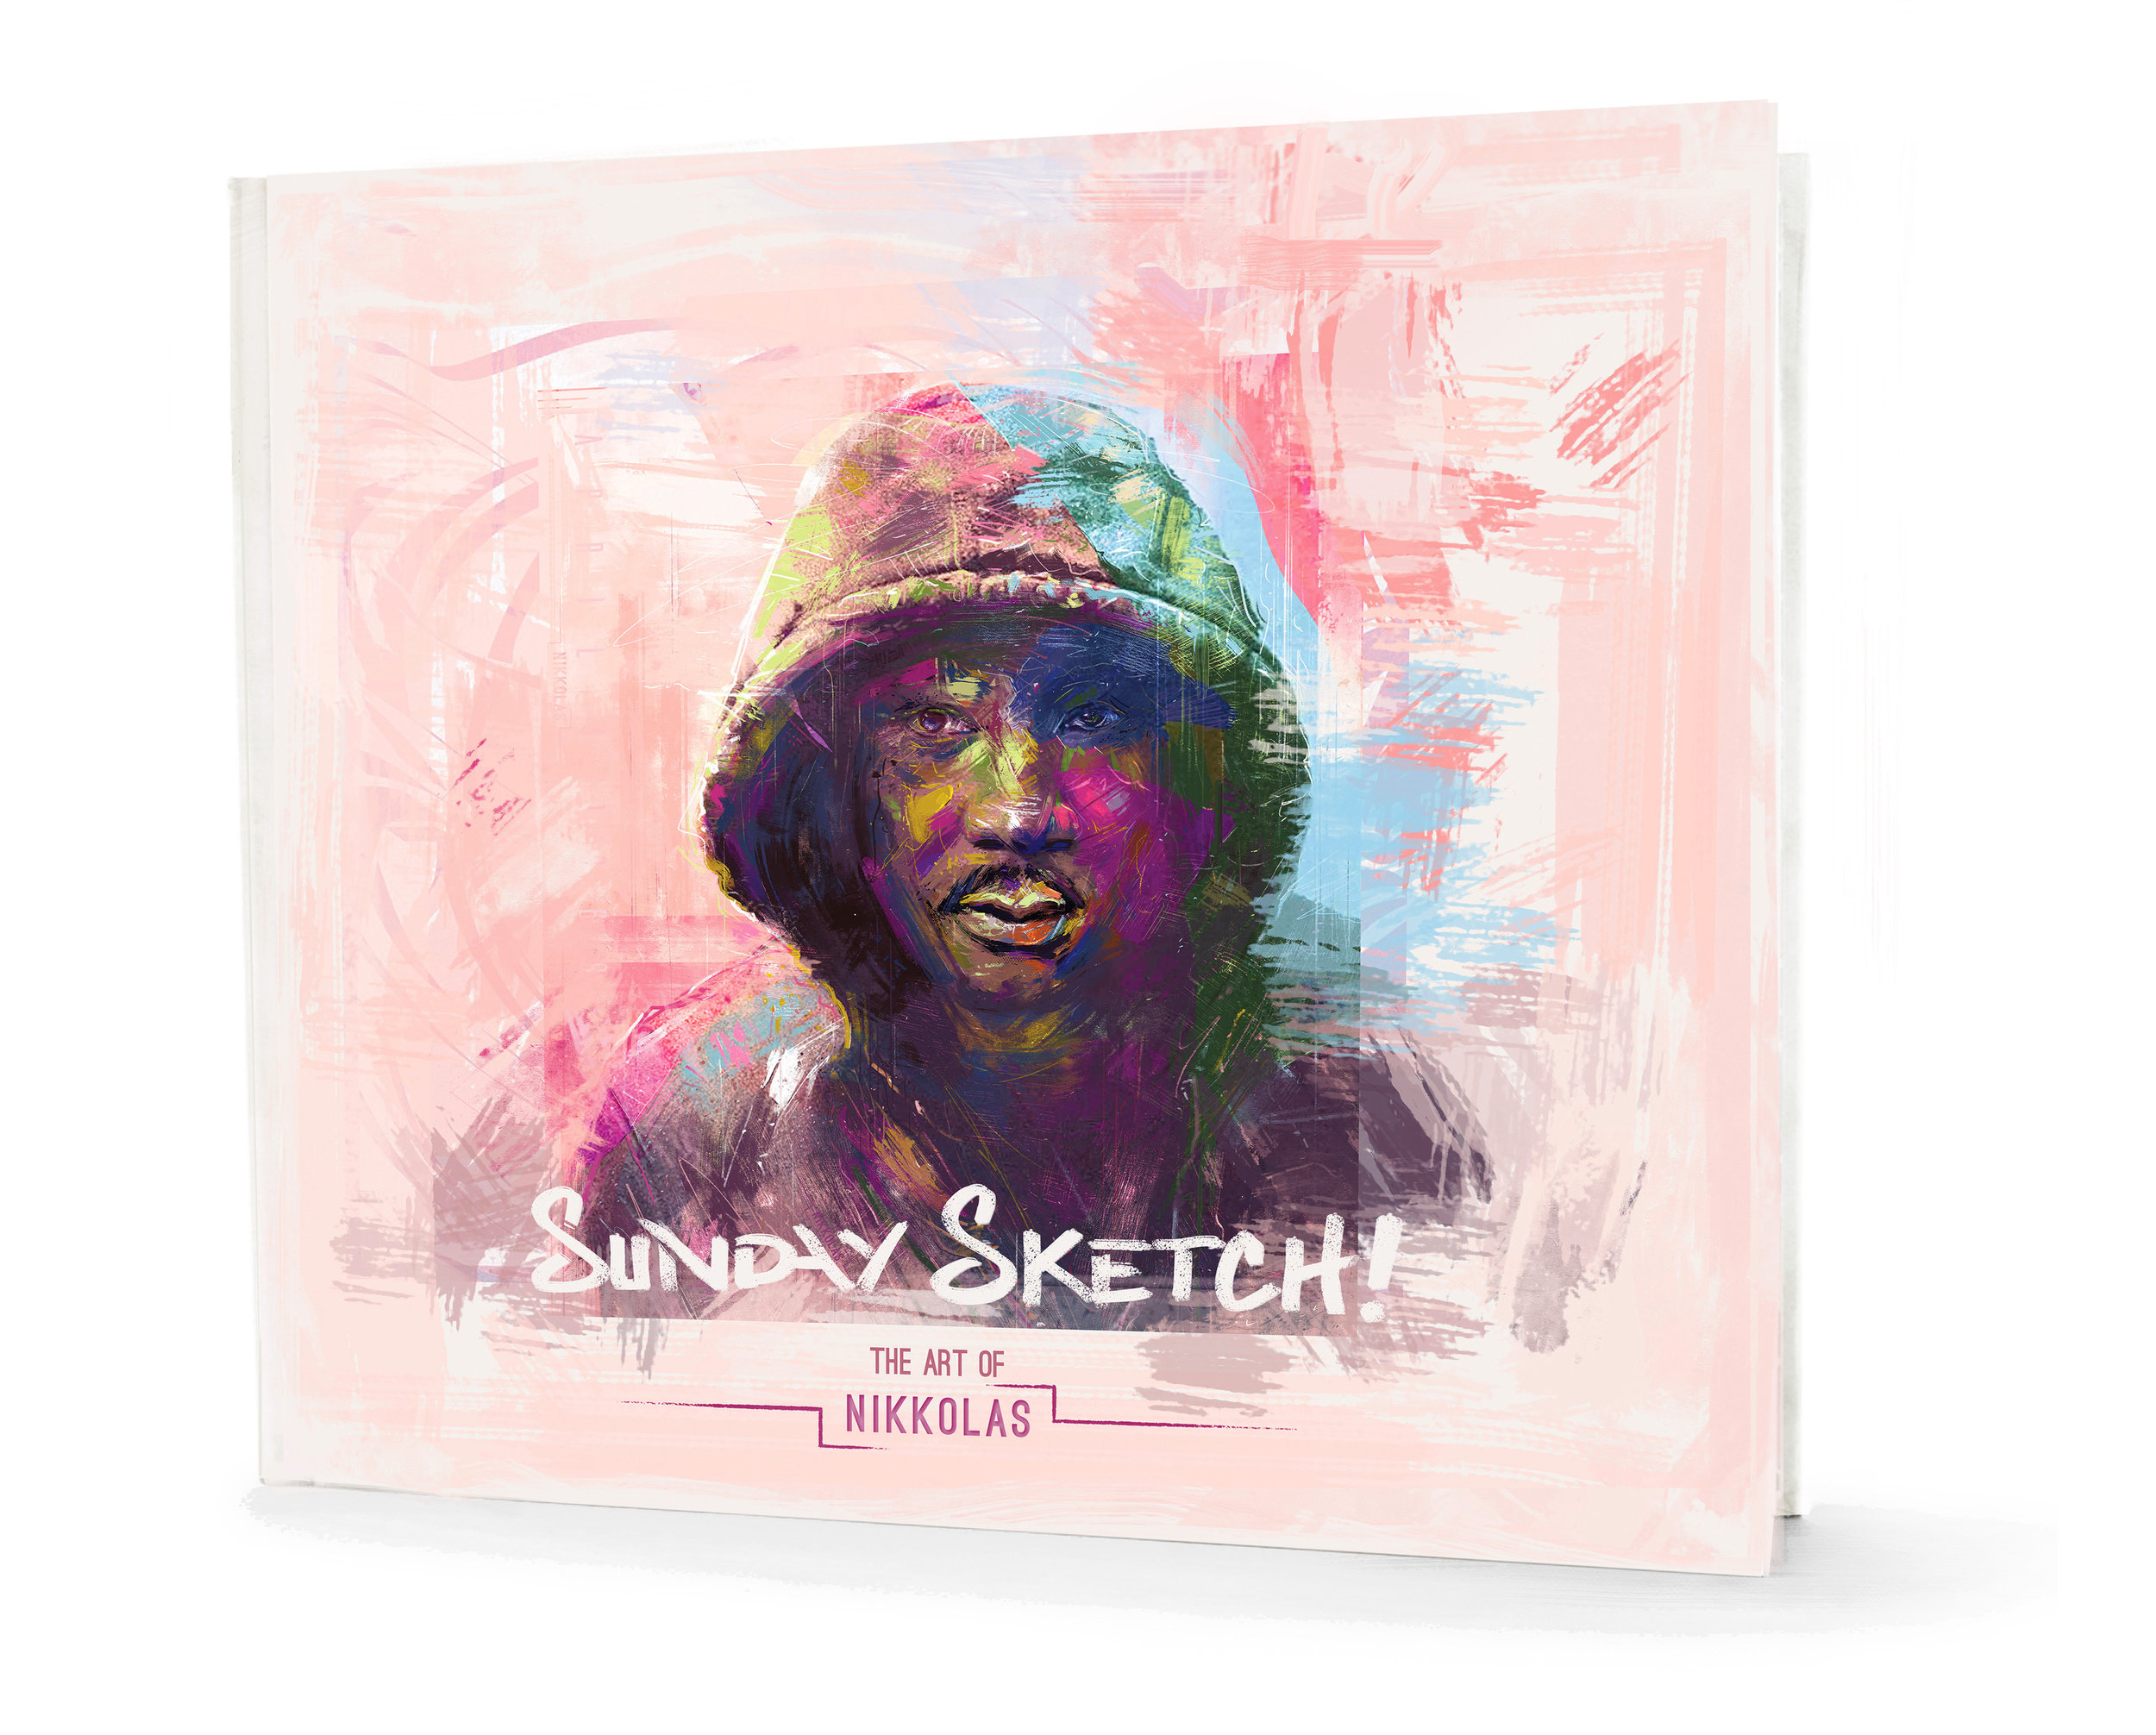 Sunday Sketching (Book Review) | Polly Castor